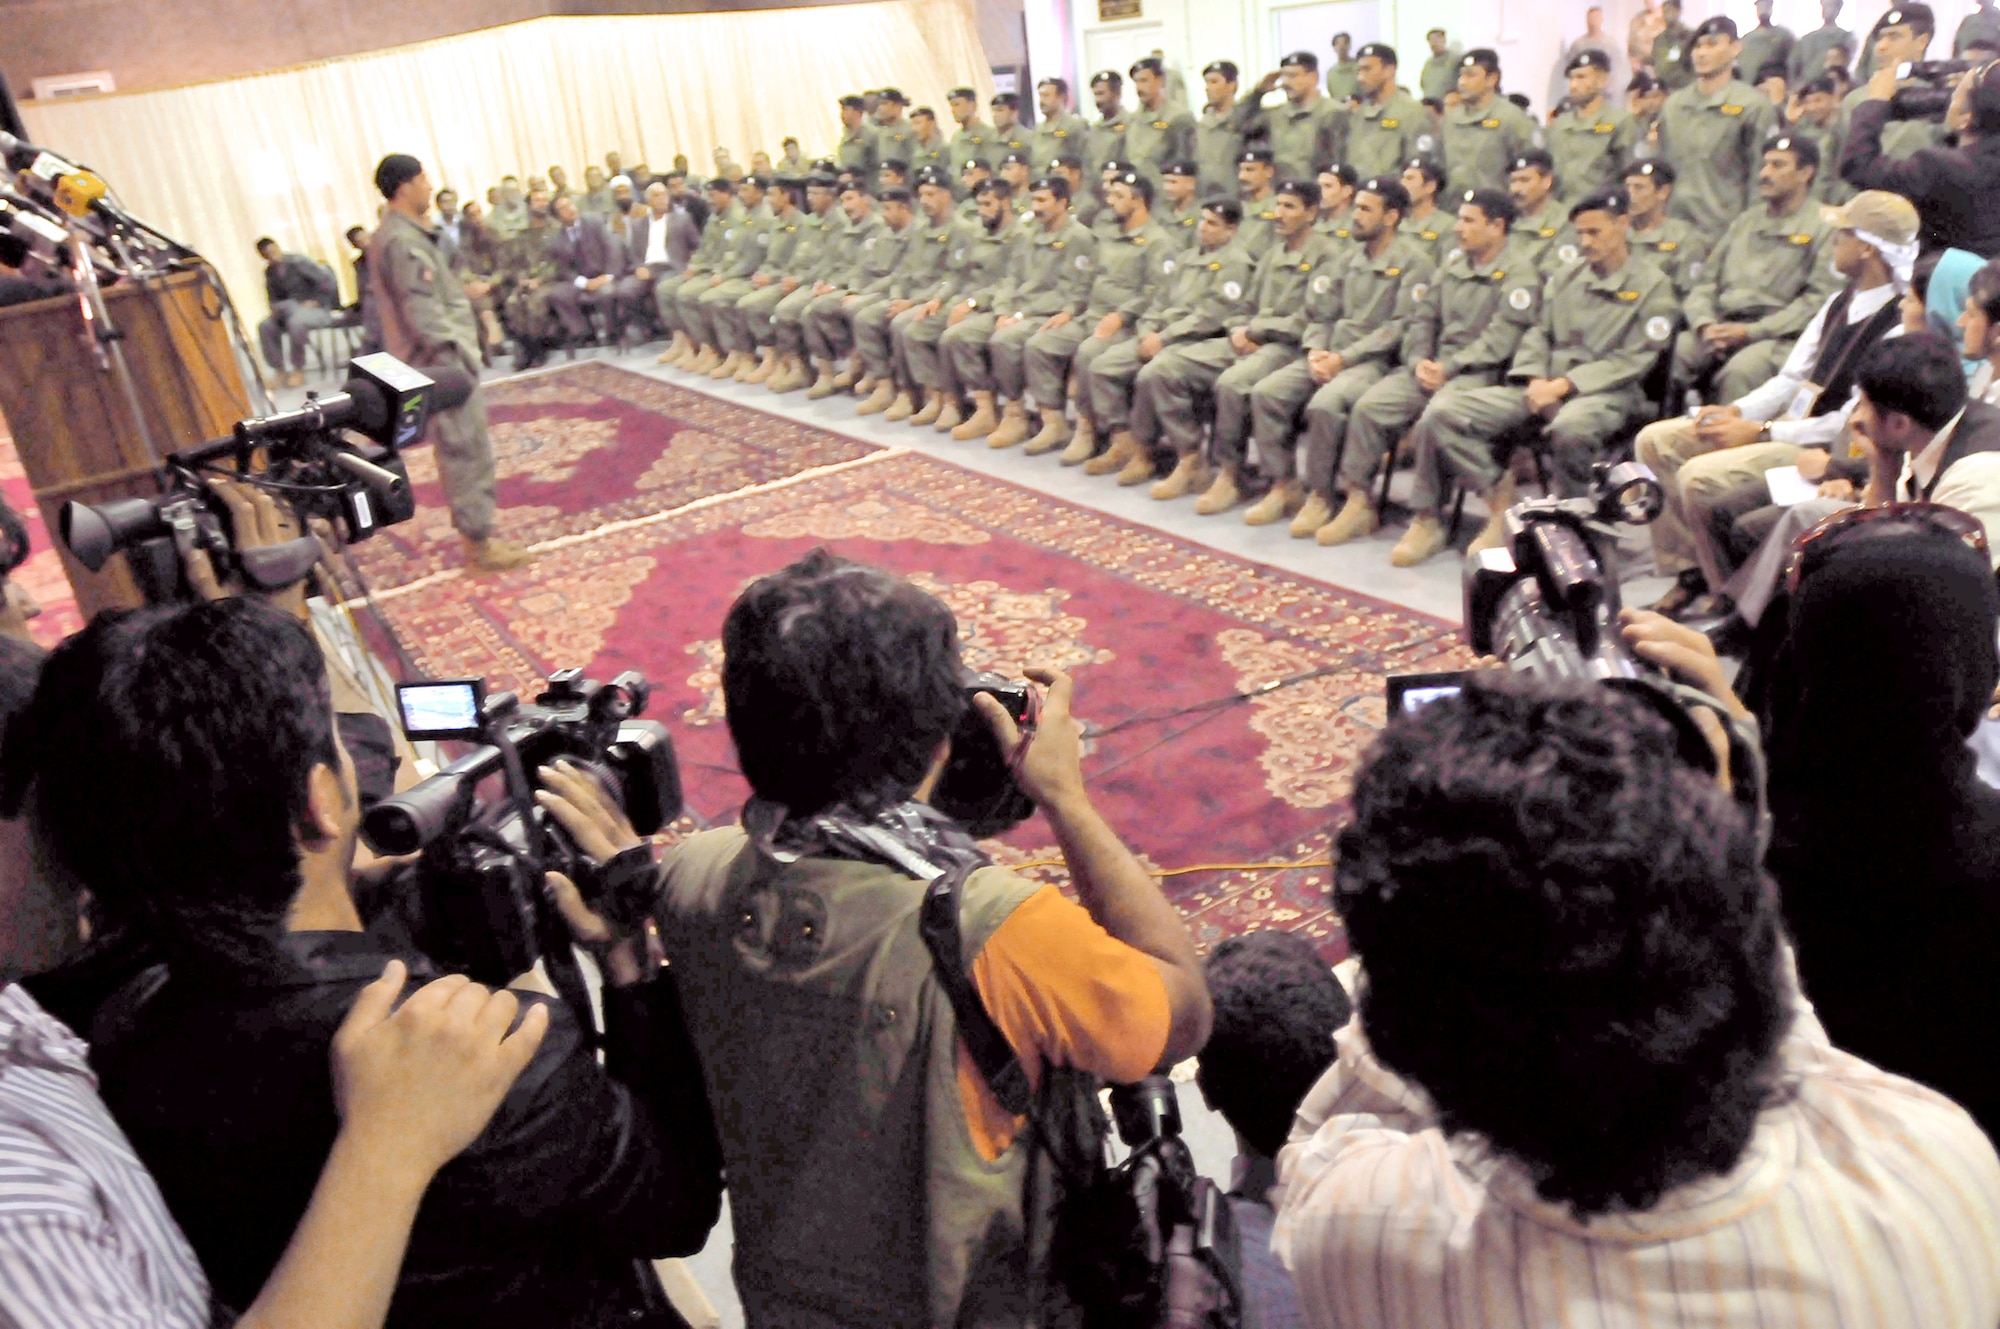 Afghan soldiers listen to speeches and are photographed by local and international press during a transition ceremony May 5, 2010, at a conference center on the Afghan National Army Air Corps base in Kabul, Afghanistan. The soldiers are from the Ministry of Interiors Air Interdiction Unit. (U.S. Navy photo/Petty Officer 2nd Class David Quillen)